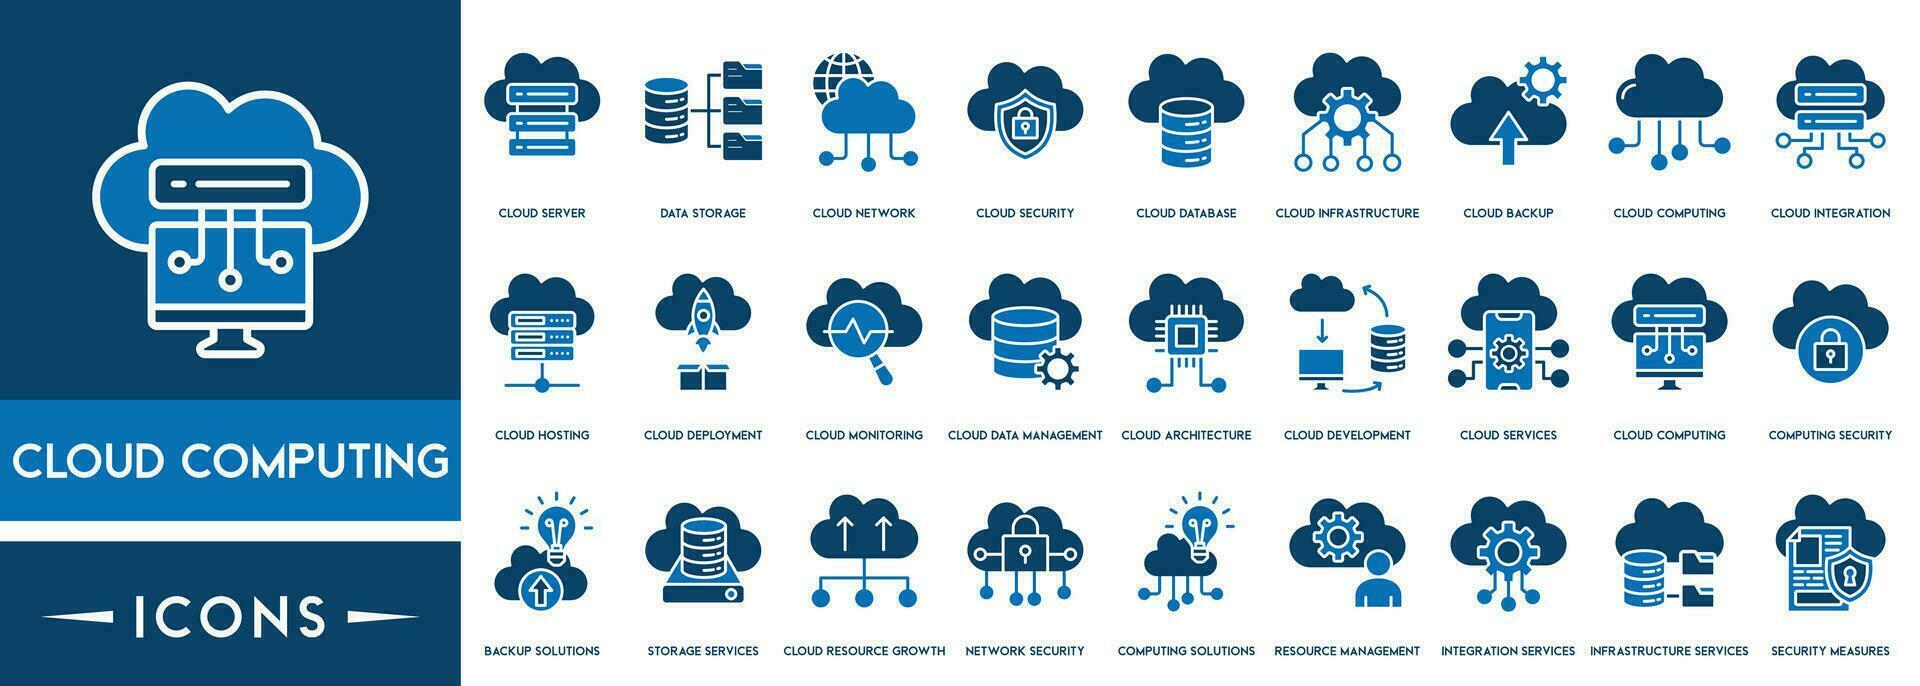 Cloud computing icons Set of line, cloud services, server, cyber security, digital transformation. Outline icon collection. vector